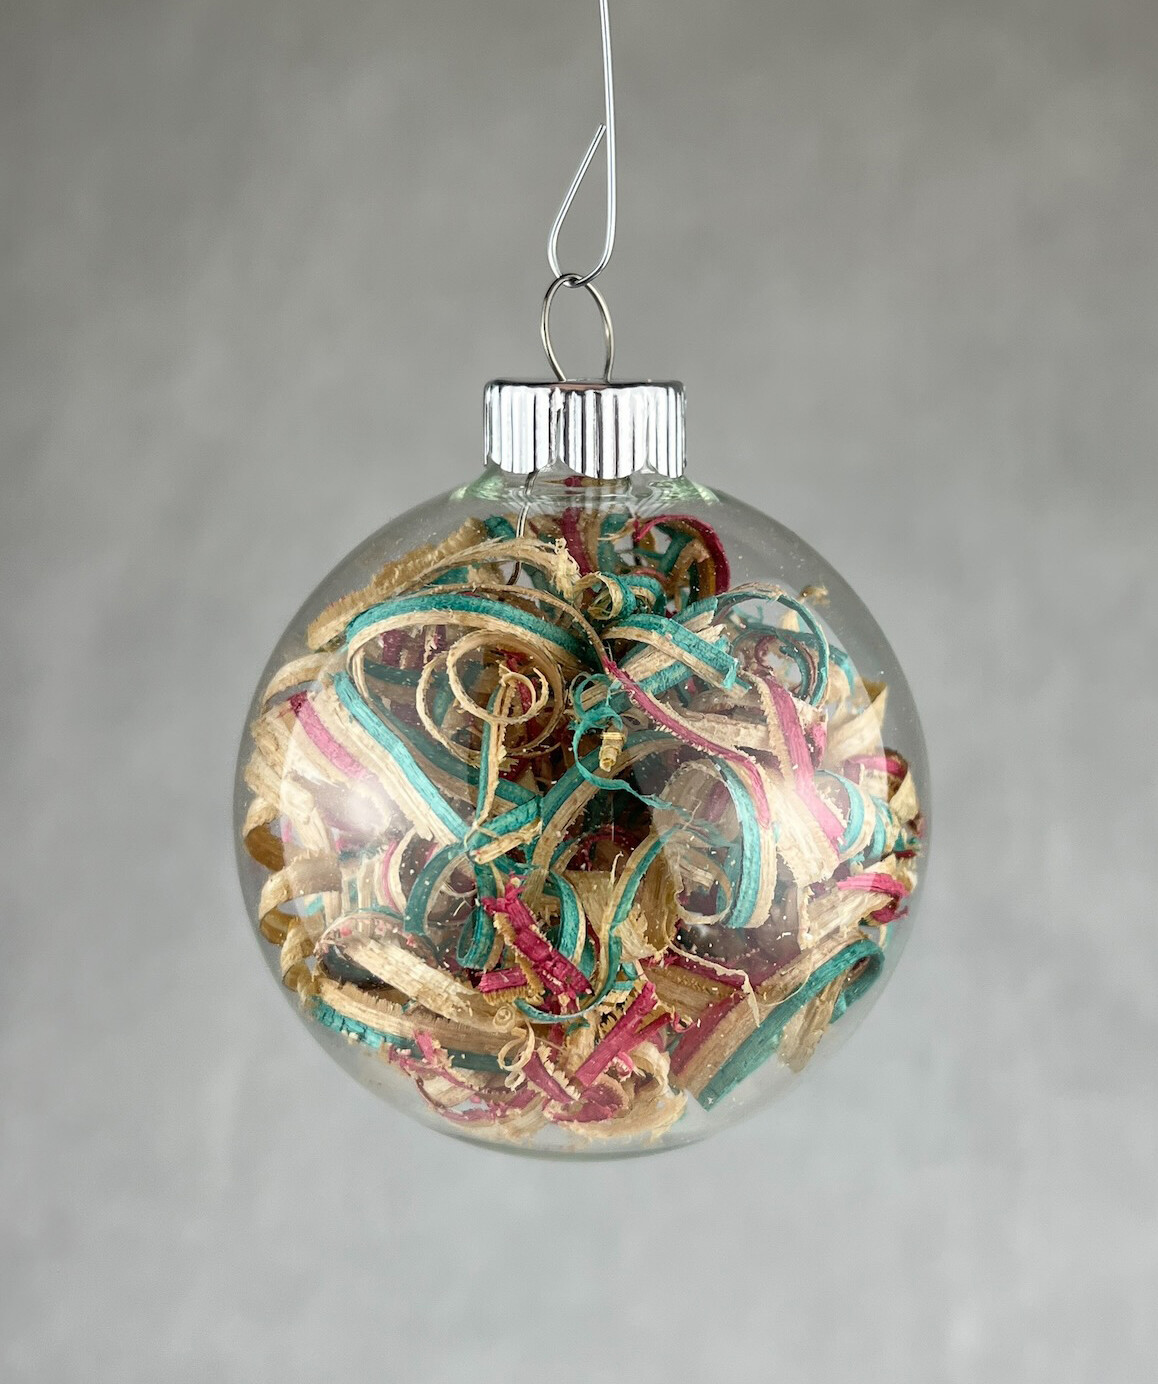 Large Glass Ornament with Various Wood & Skateboard Shavings